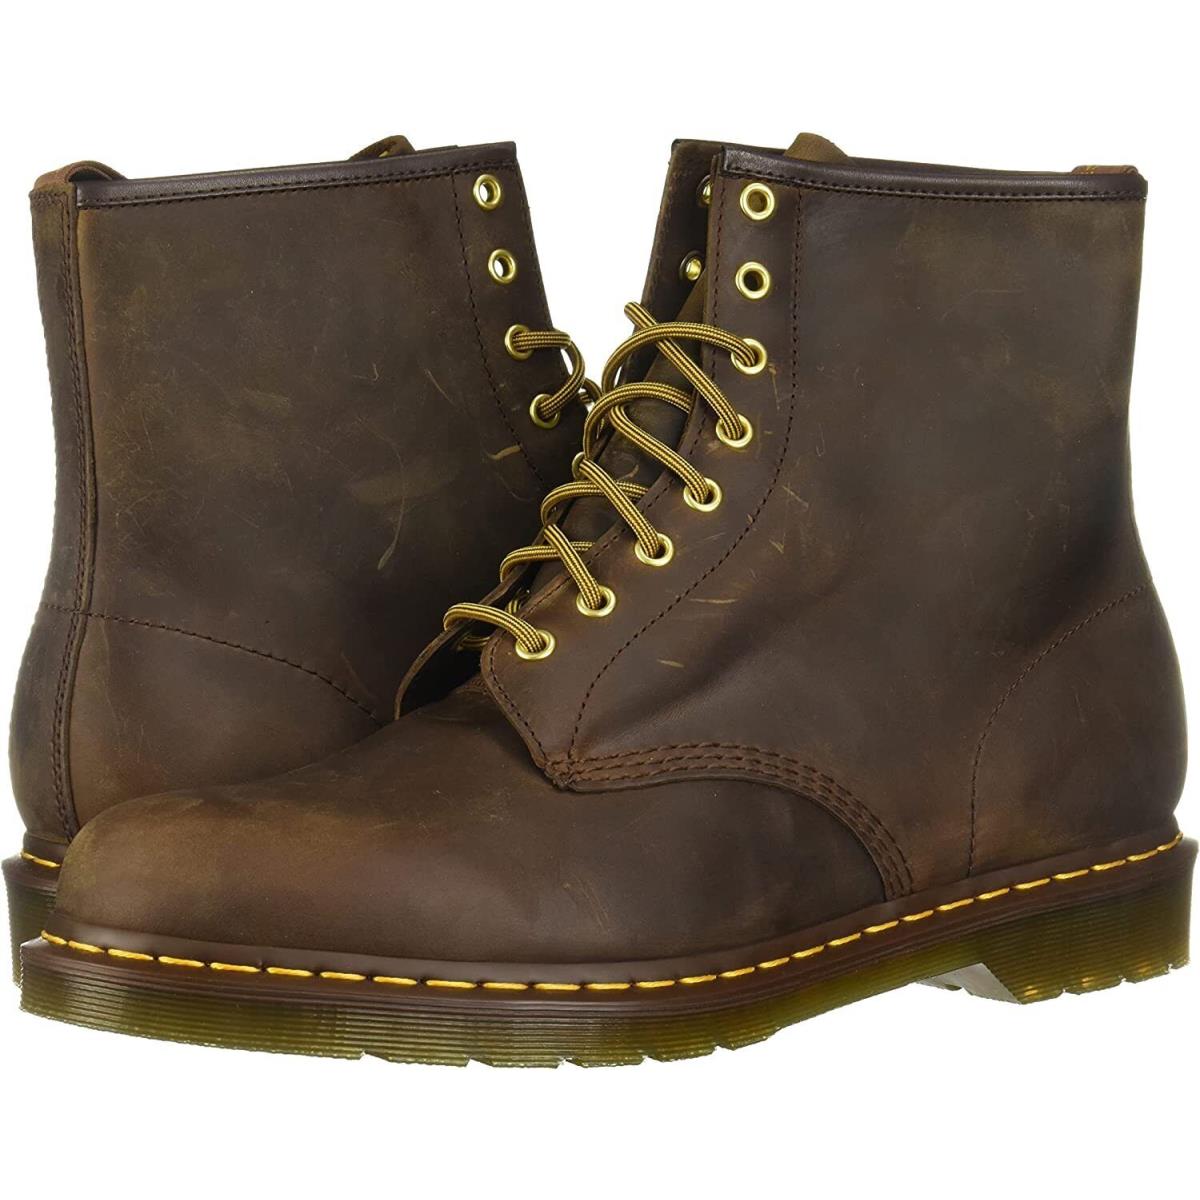 Mens Shoes Dr. Martens 1460 8 Eye Leather Boots 11822200 Aztec Brown Crazy Horse